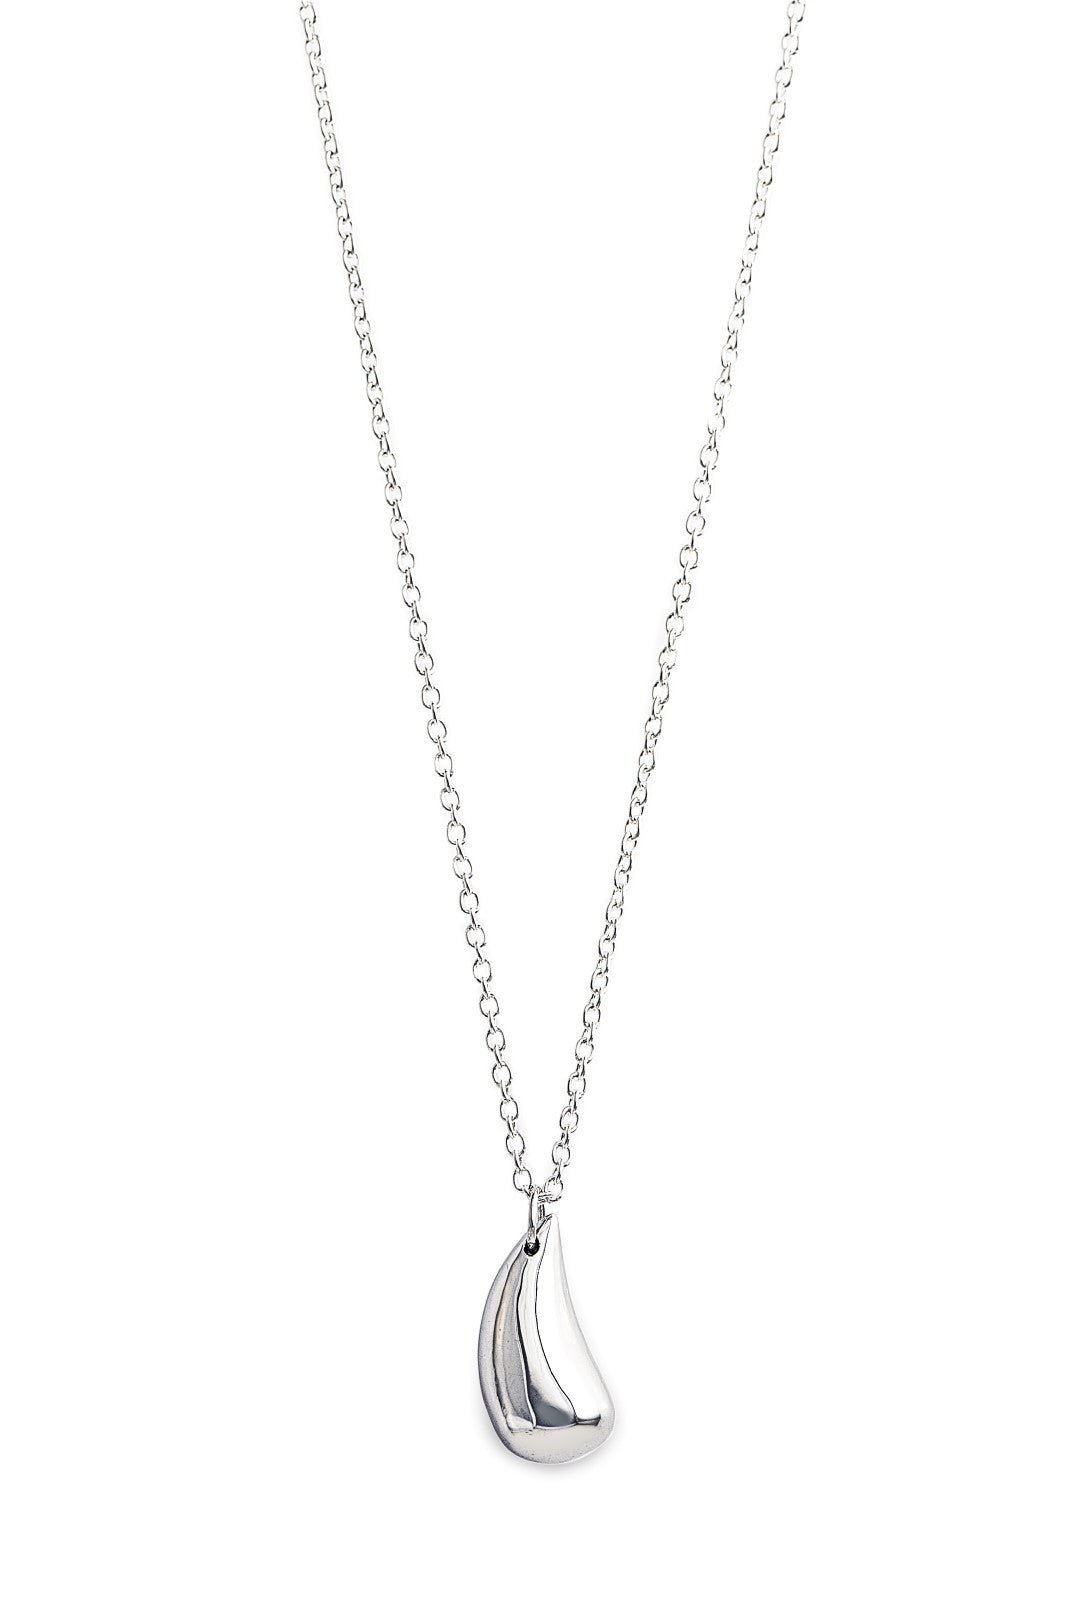 The Teardrop Necklace in 925 sterling silver is a dainty teardrop-shaped pendant for a minimalistic super sheek look. Comes with a beautiful fine silver chain of your choice. Stylish and comfortable jewellery perfect for everyday wear. Jewellery by Bellagio & Co. Worldwide shipping.